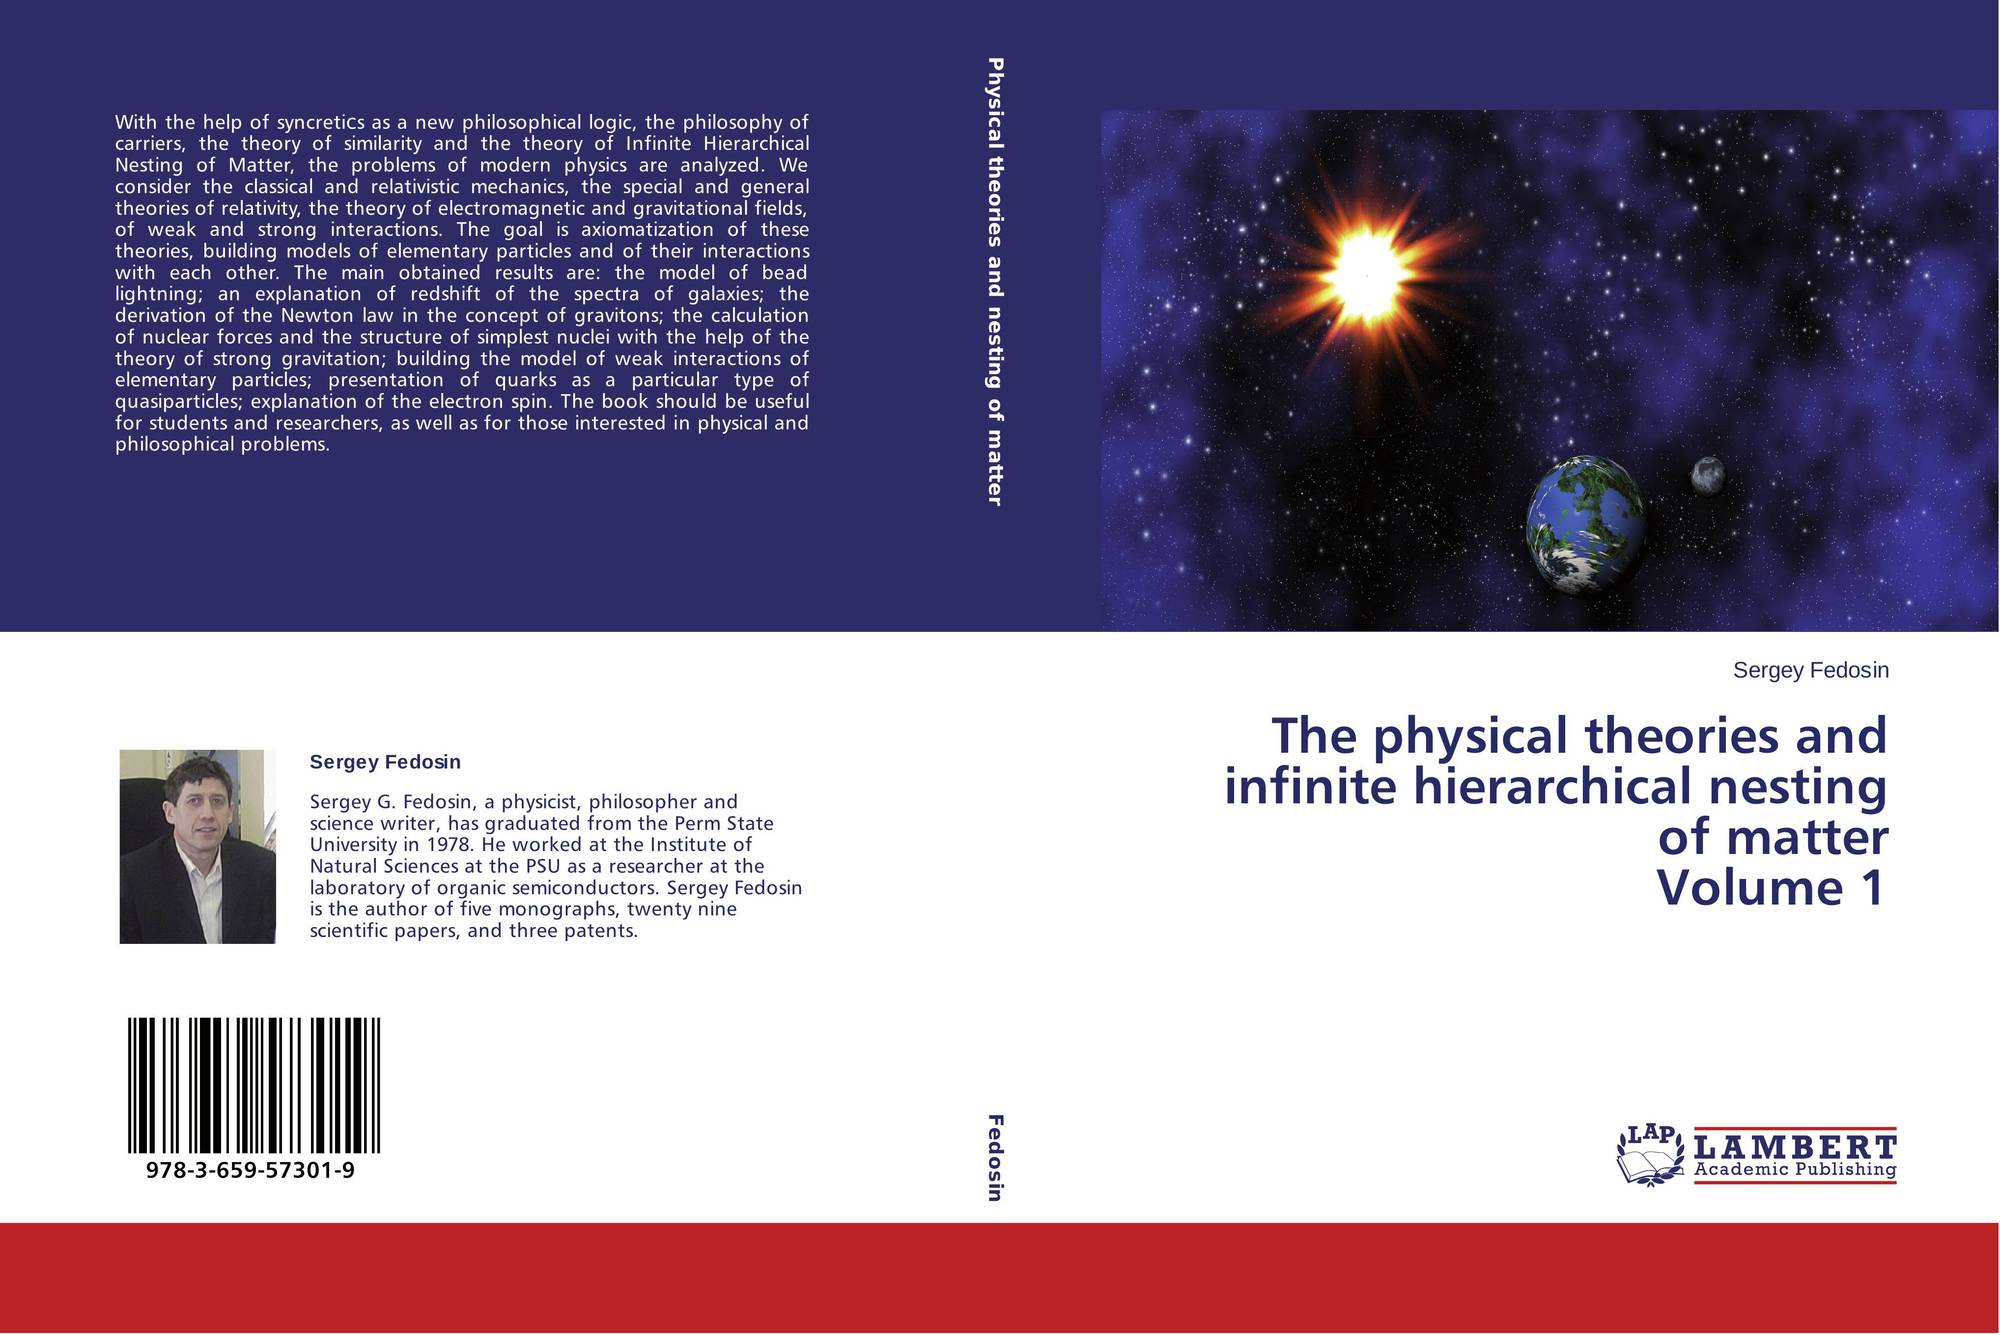 Book cover. The physical theories and infinite hierarchical nesting of matter. Sergey Fedosin